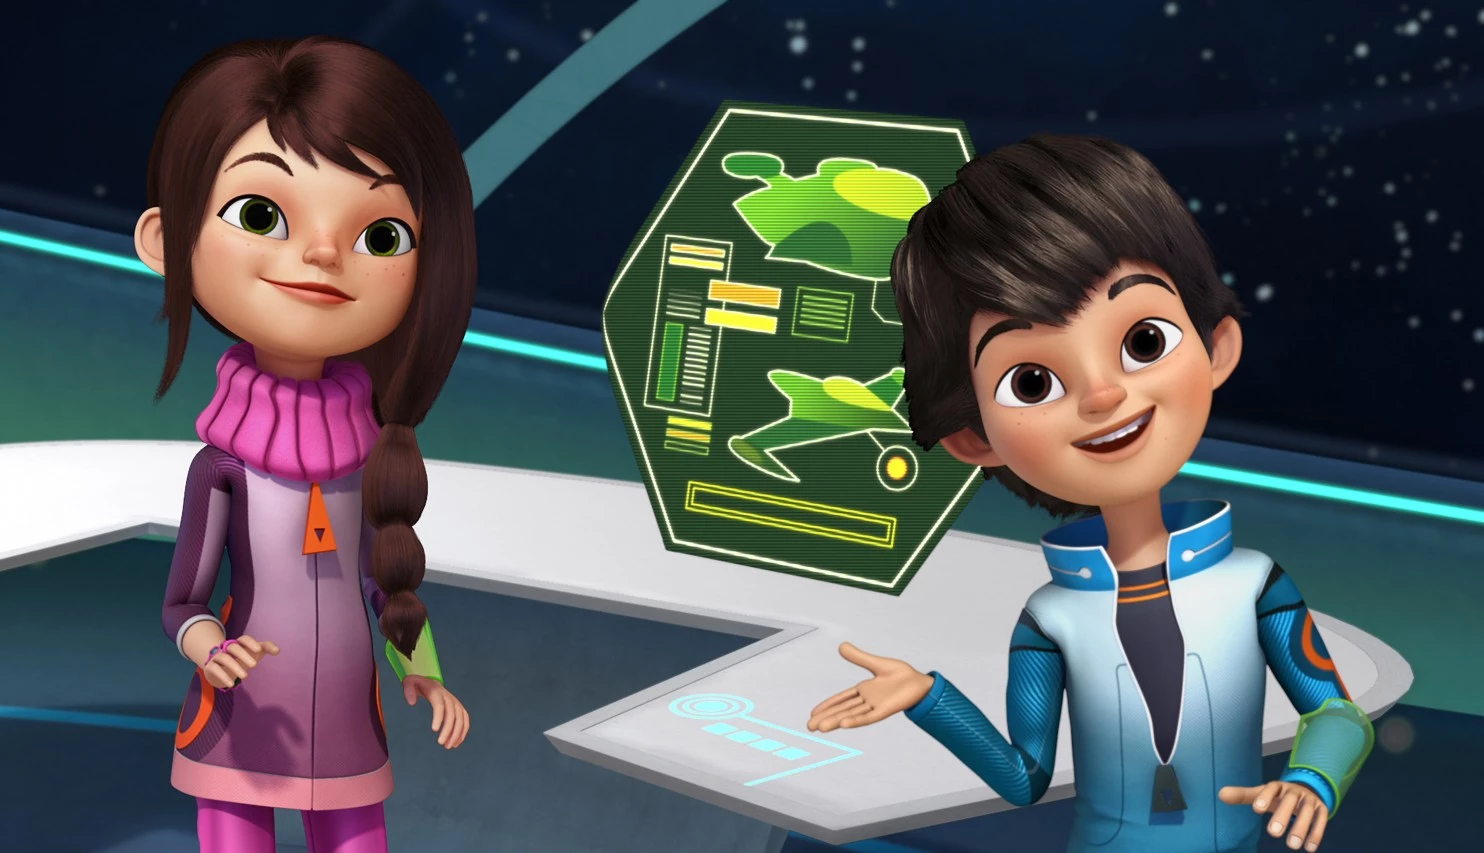 Disney Junior’s “Miles from Tomorrowland” Inspires Audiences with Science